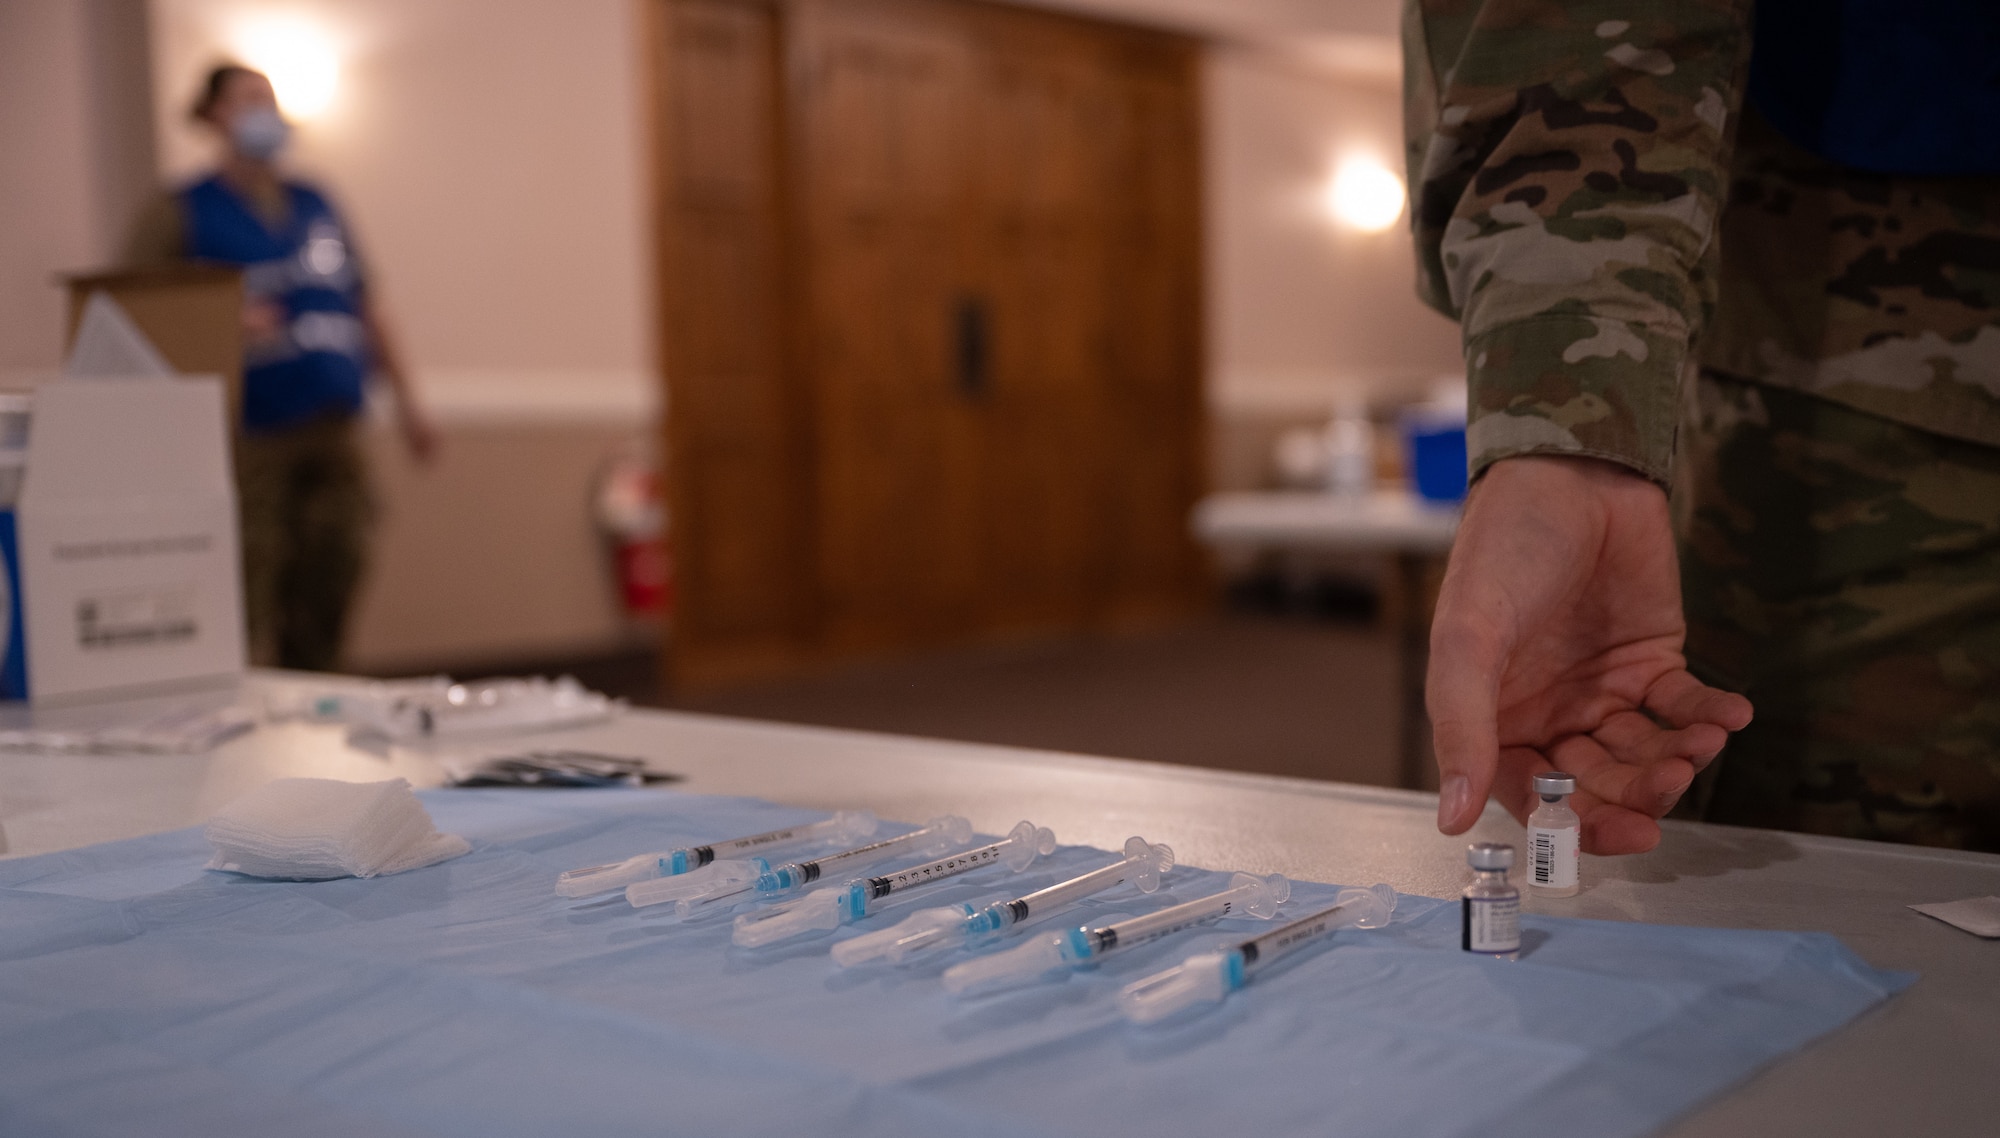 Vaccinations can help ensure service members’ health and safety while preserving the department’s readiness and ability to execute worldwide air and space forces missions, according to department leaders.